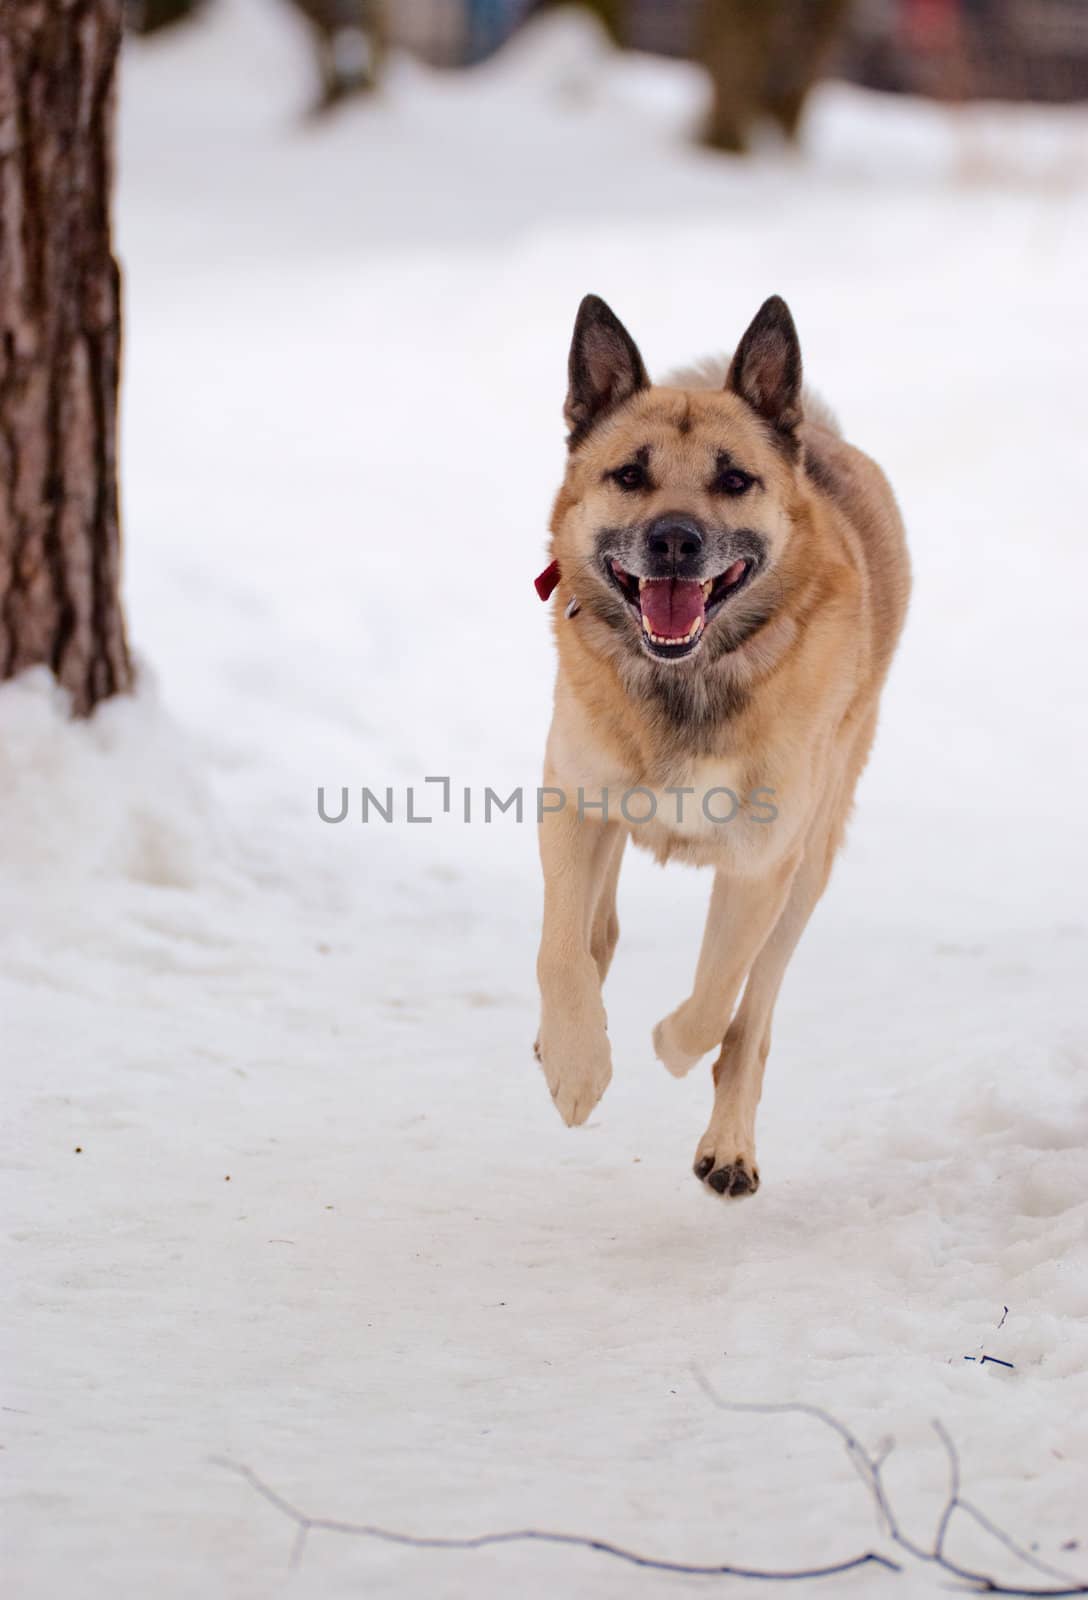 West Siberian Laika running in winter forest